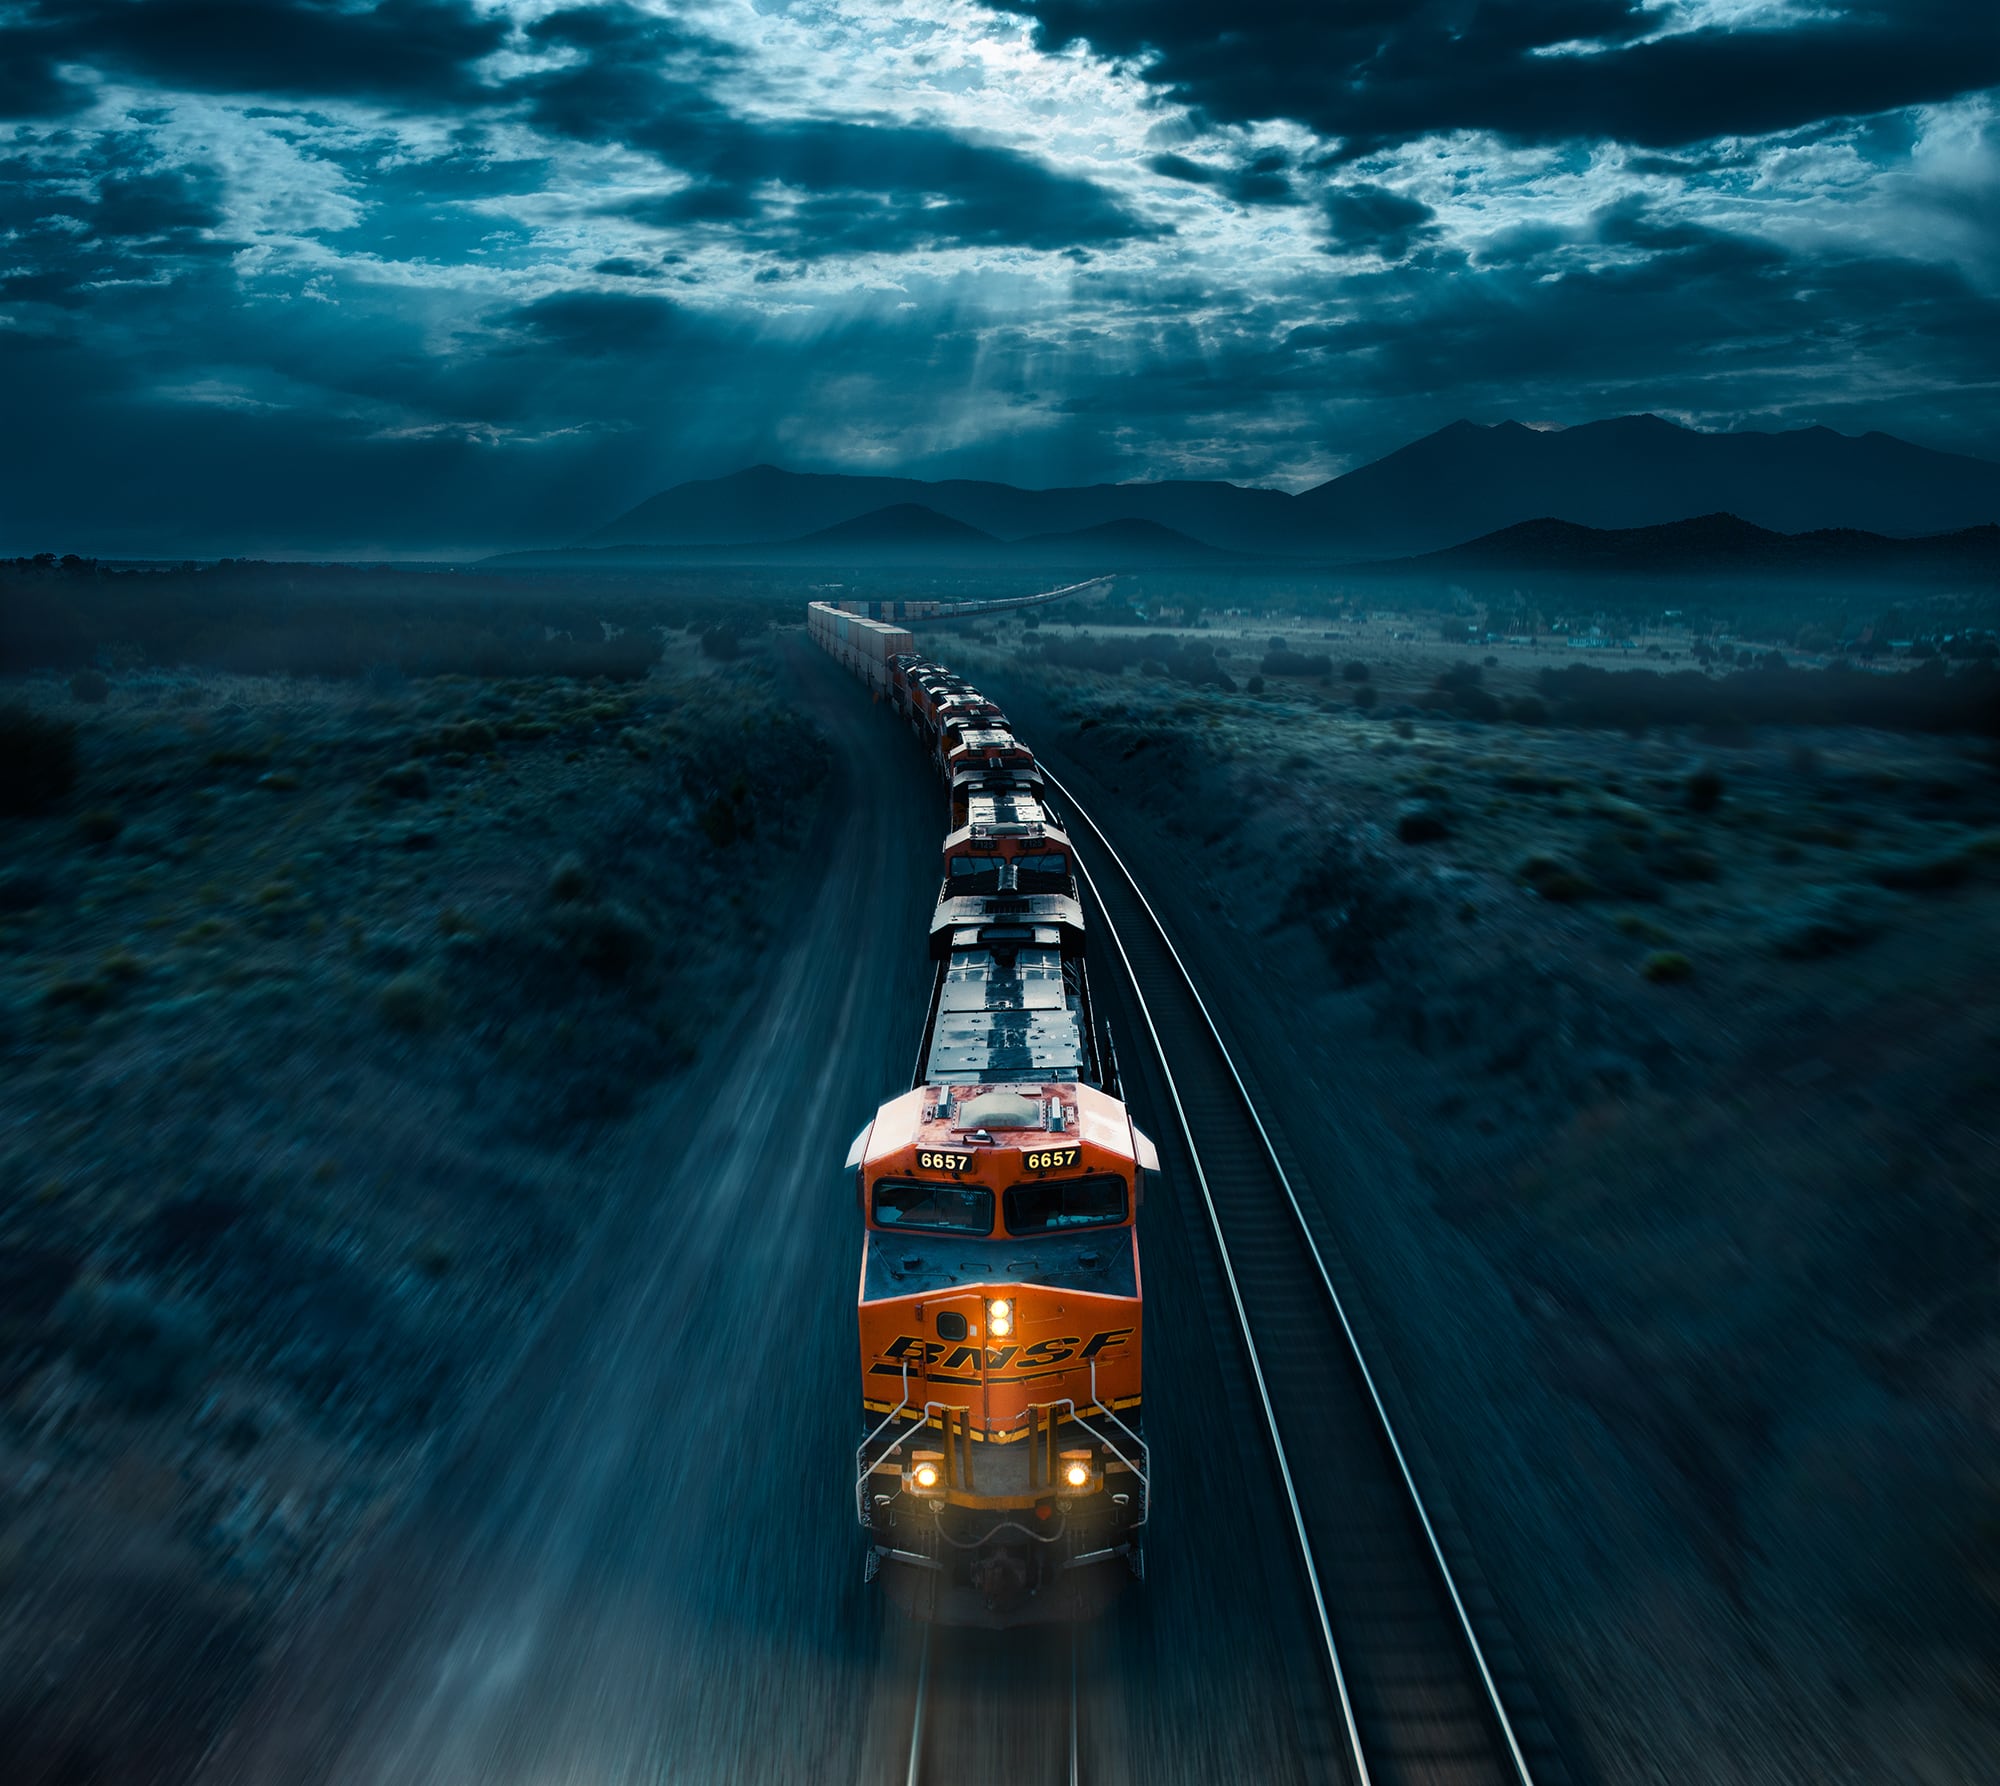 BNSF Freight Train photographed by commercial automotive photographer